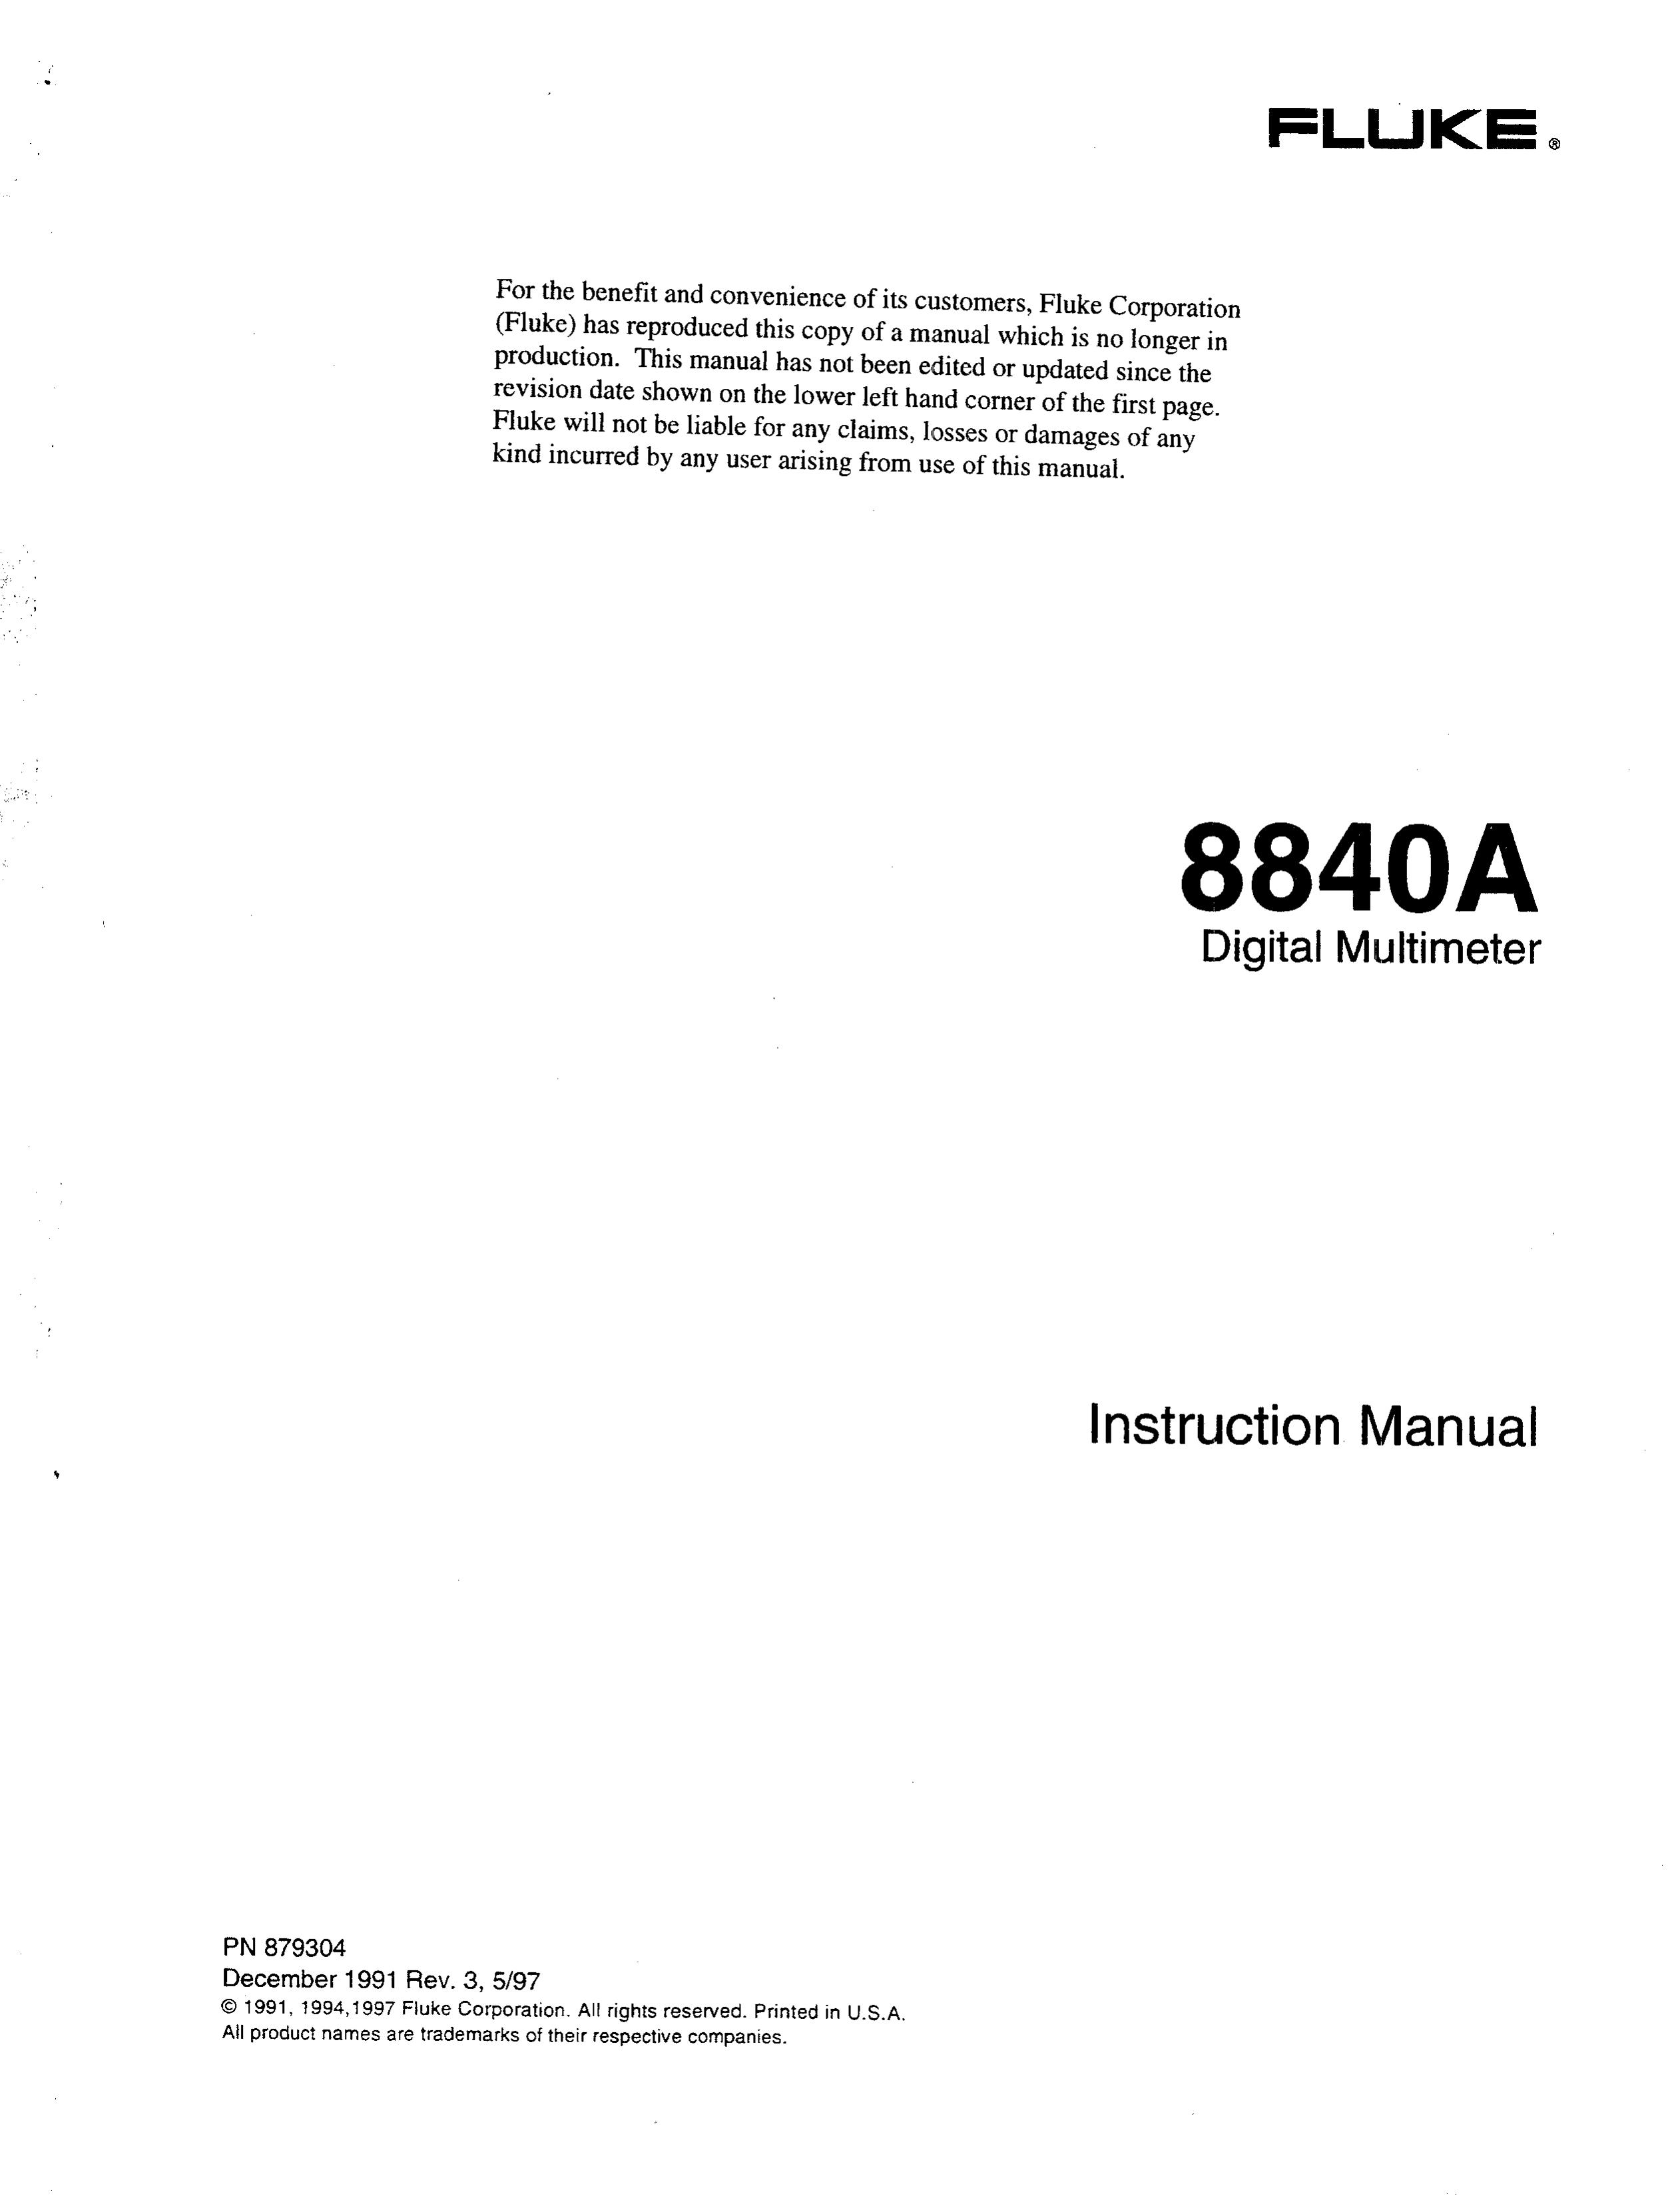 Fluke 8840A Recording Equipment User Manual (Page 1)